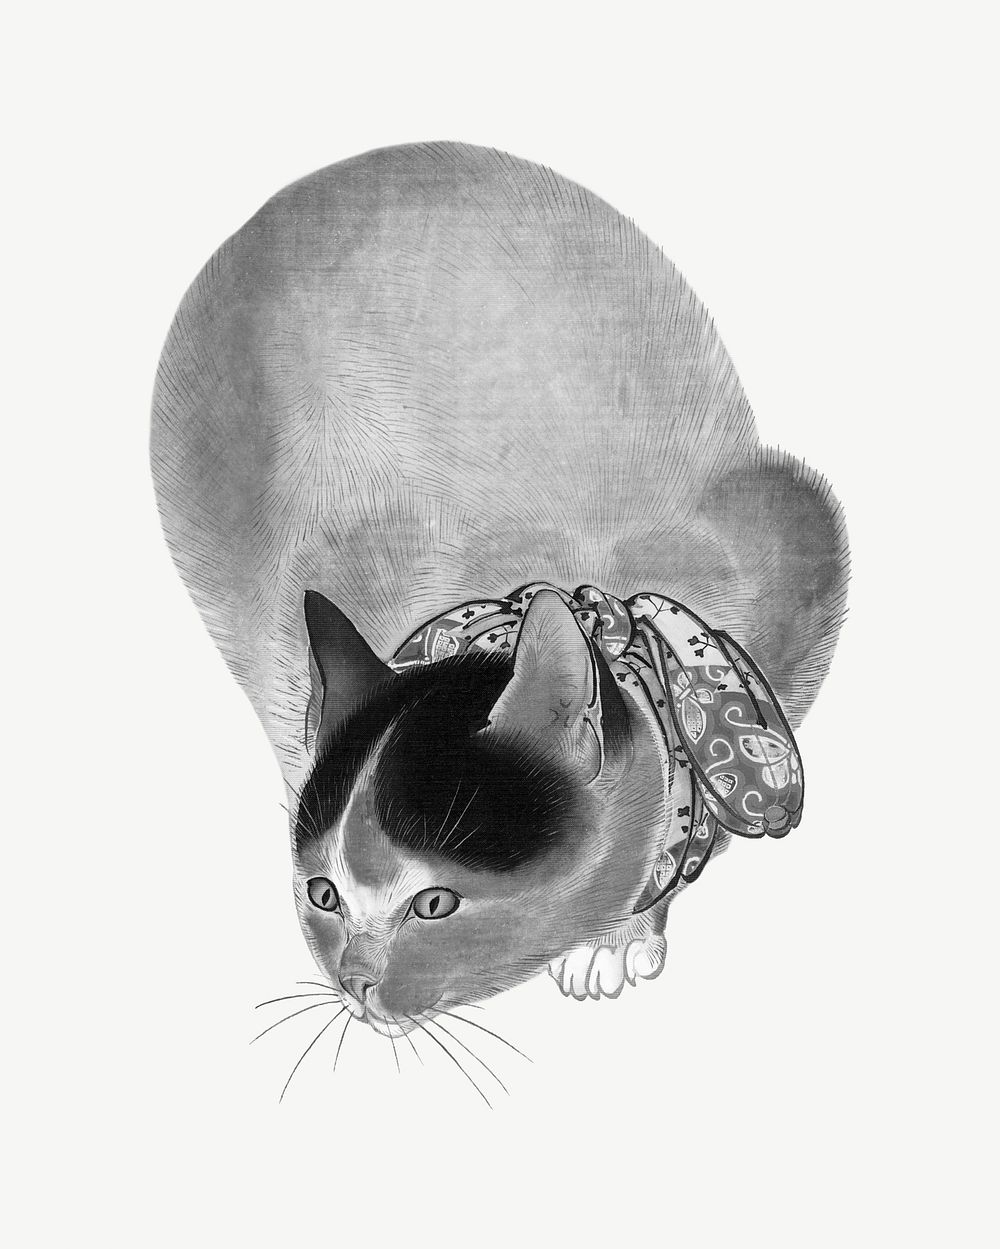 Cat, vintage animal illustration by Oide Tōkō psd.  Remixed by rawpixel. 